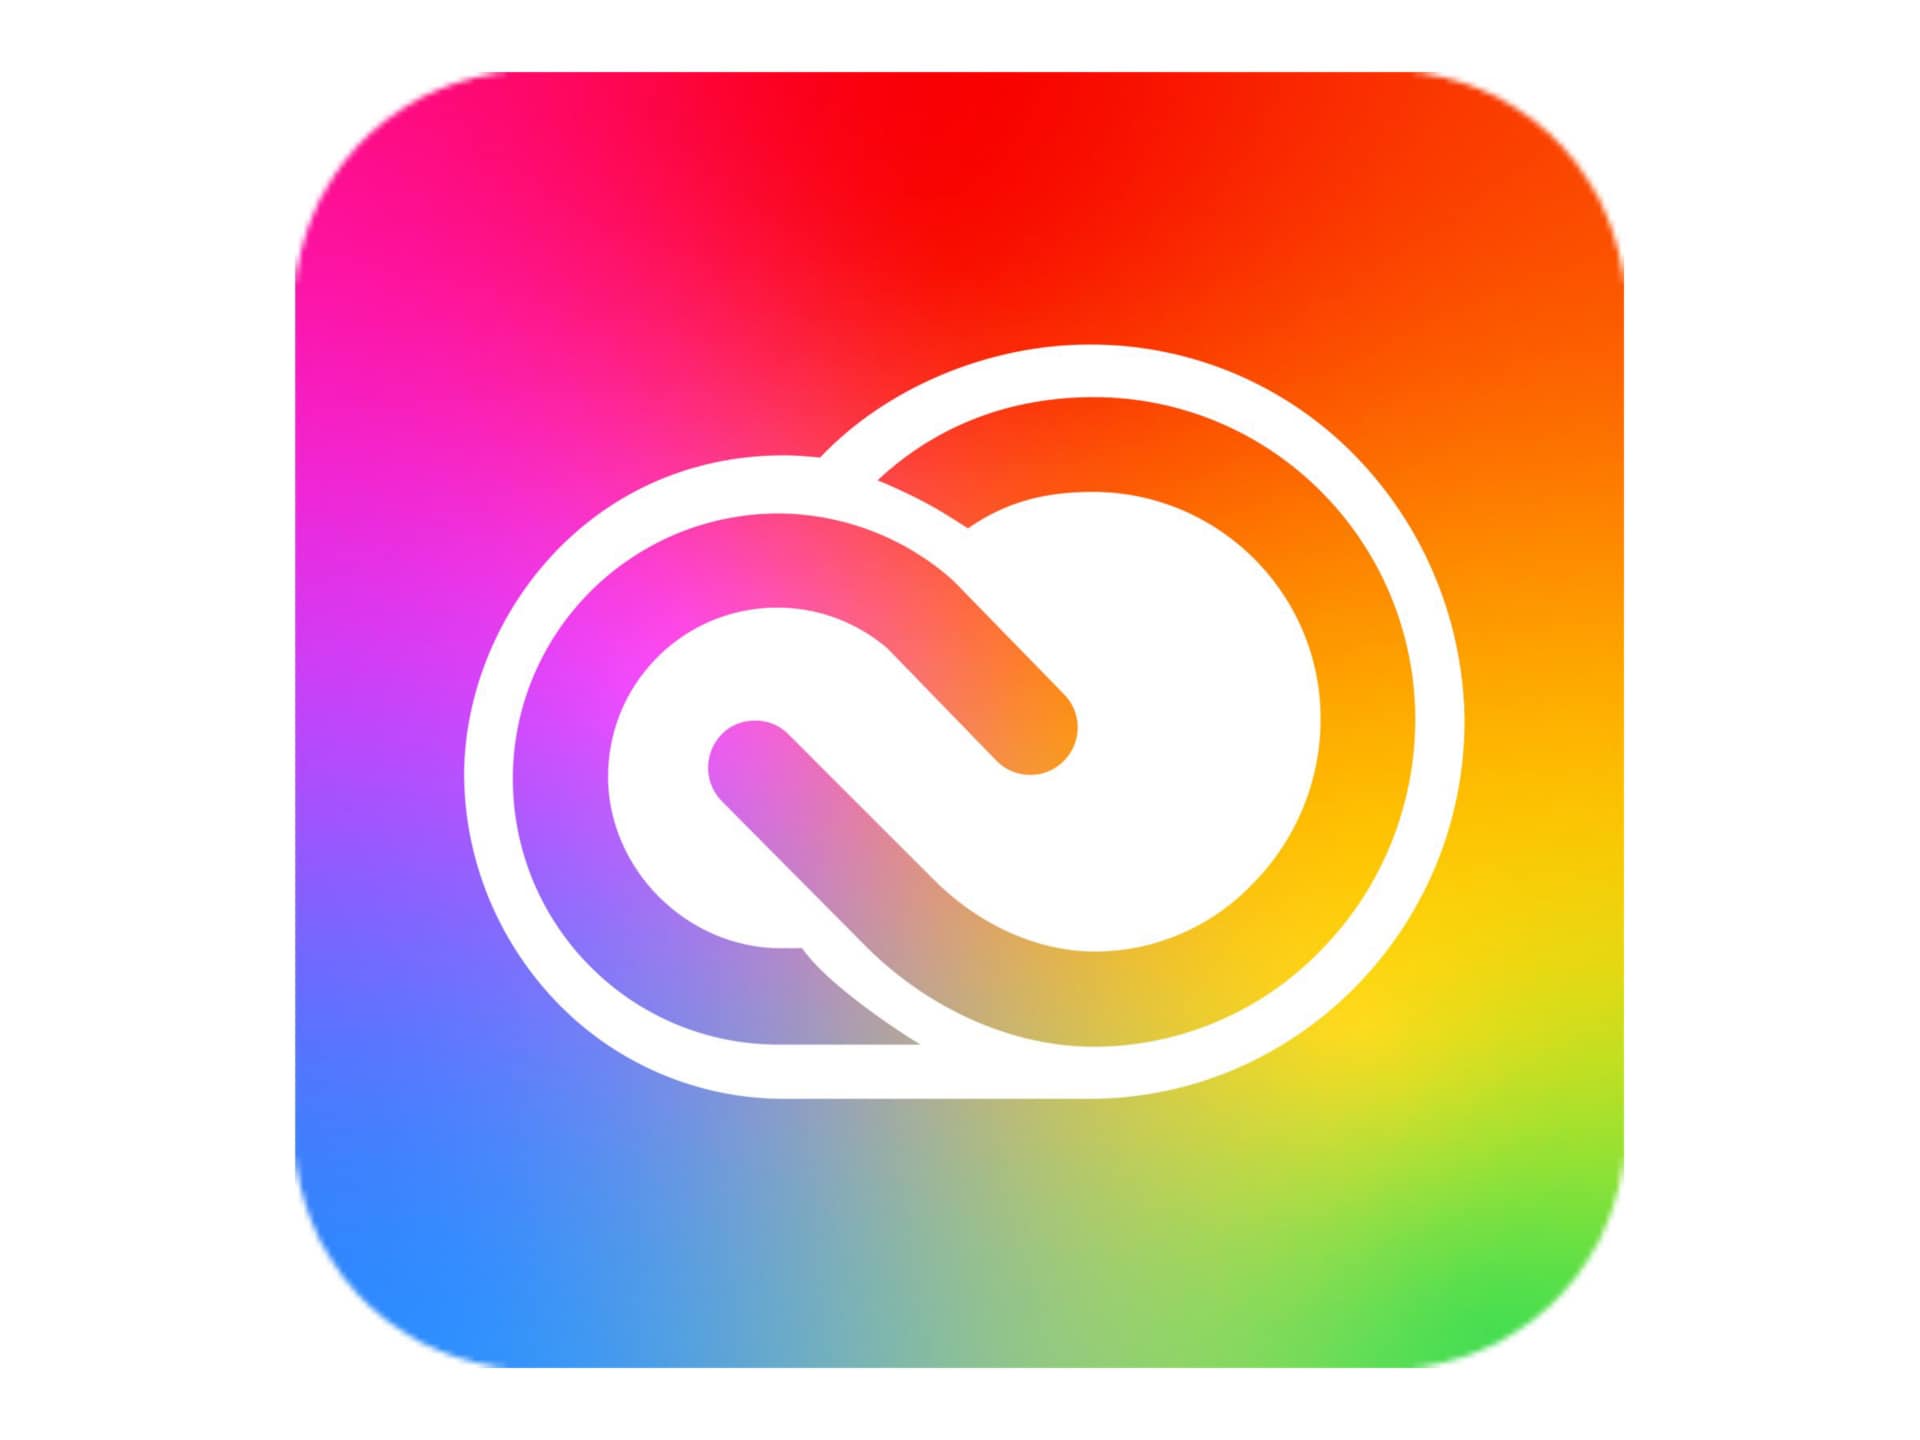 Adobe Creative Cloud for Enterprise - All Apps - Subscription New (1 month) - 1 named user